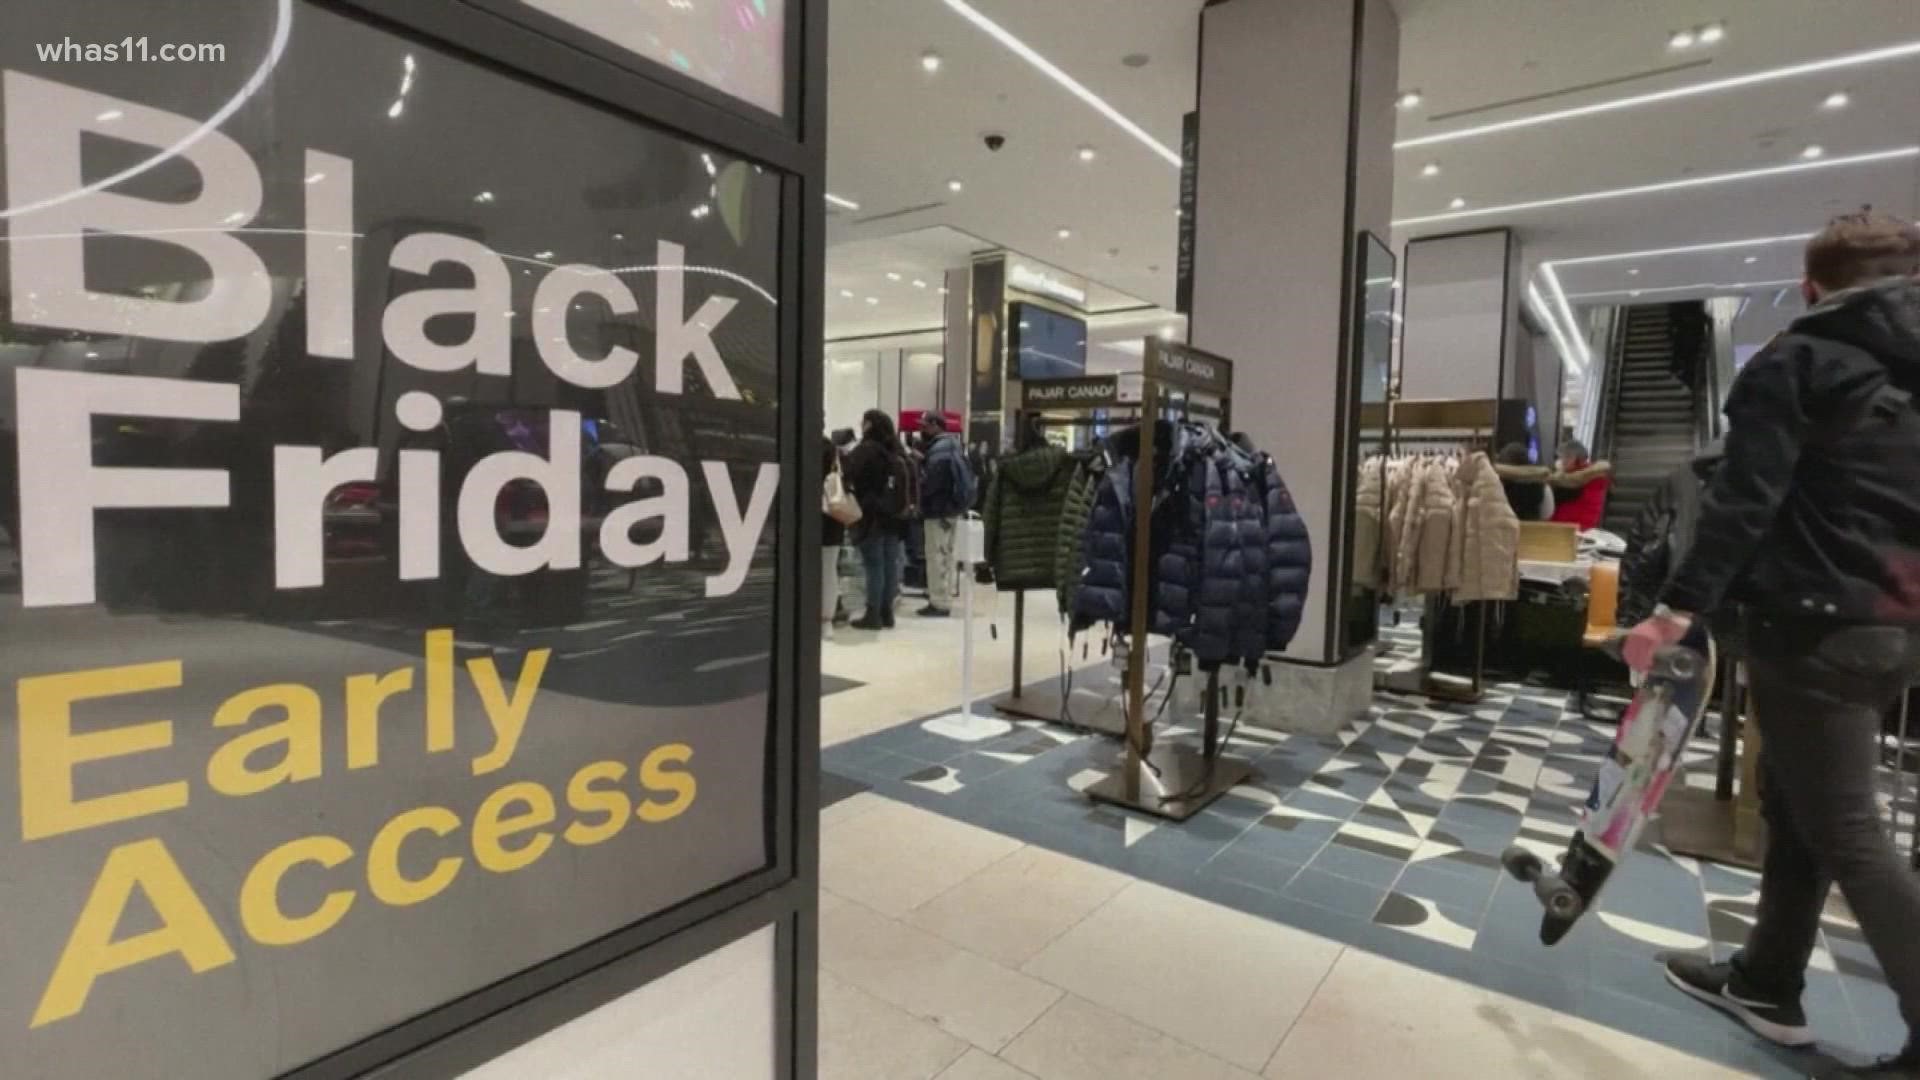 In the past, Black Friday typically marked the beginning of the holiday season.